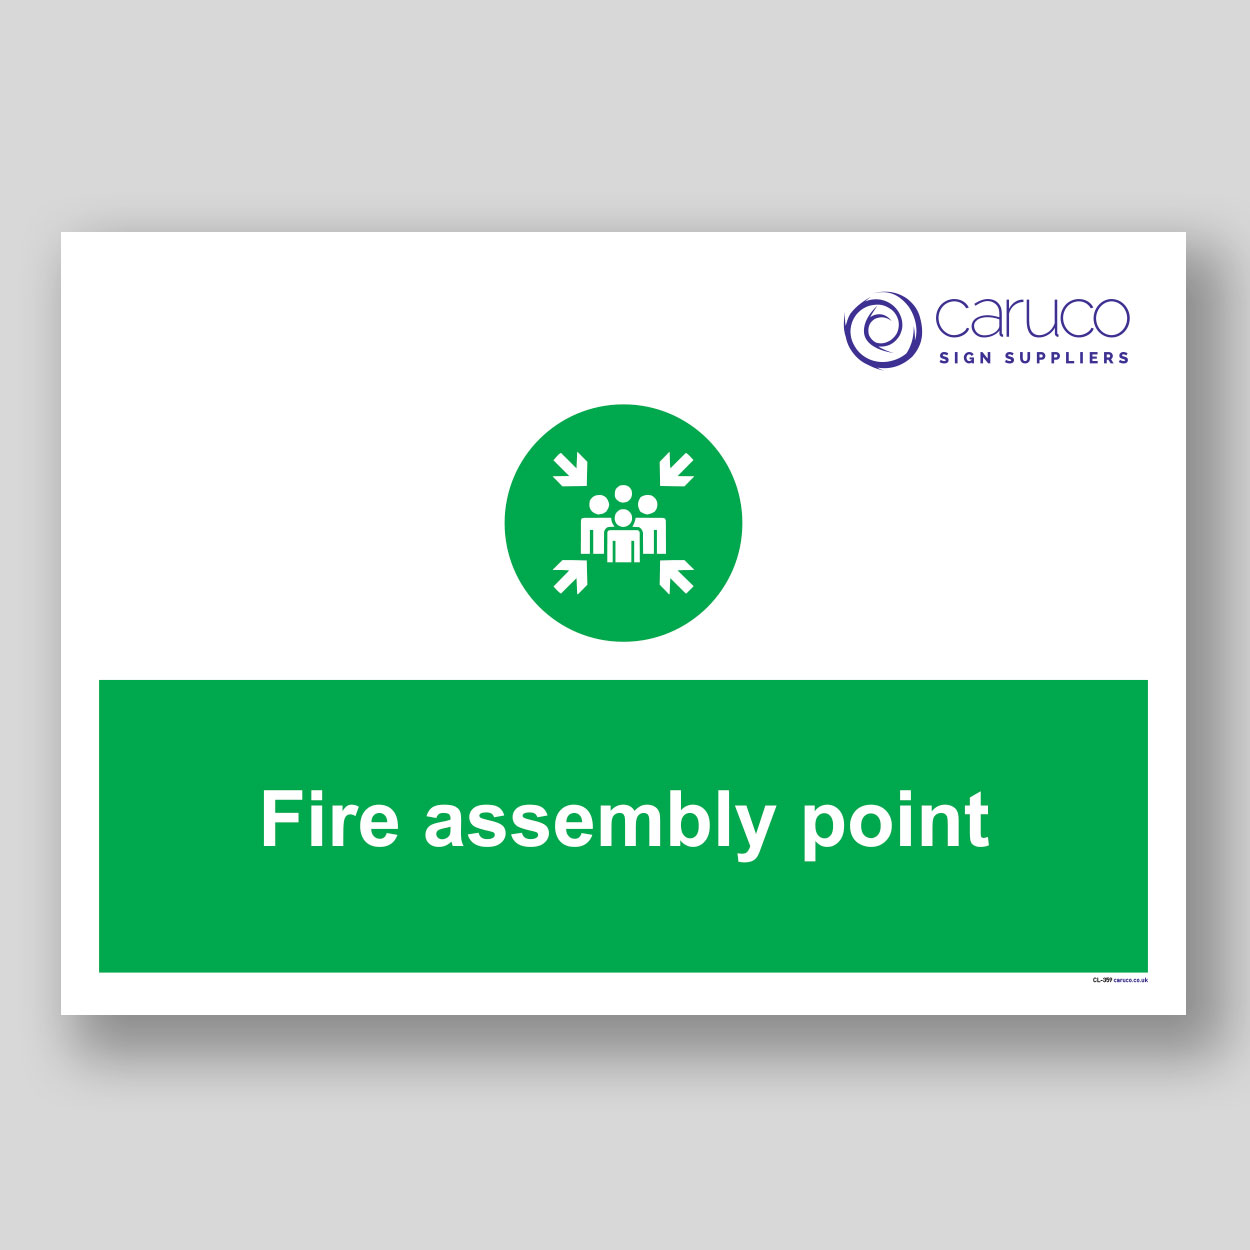 CL-359 Fire assembly point